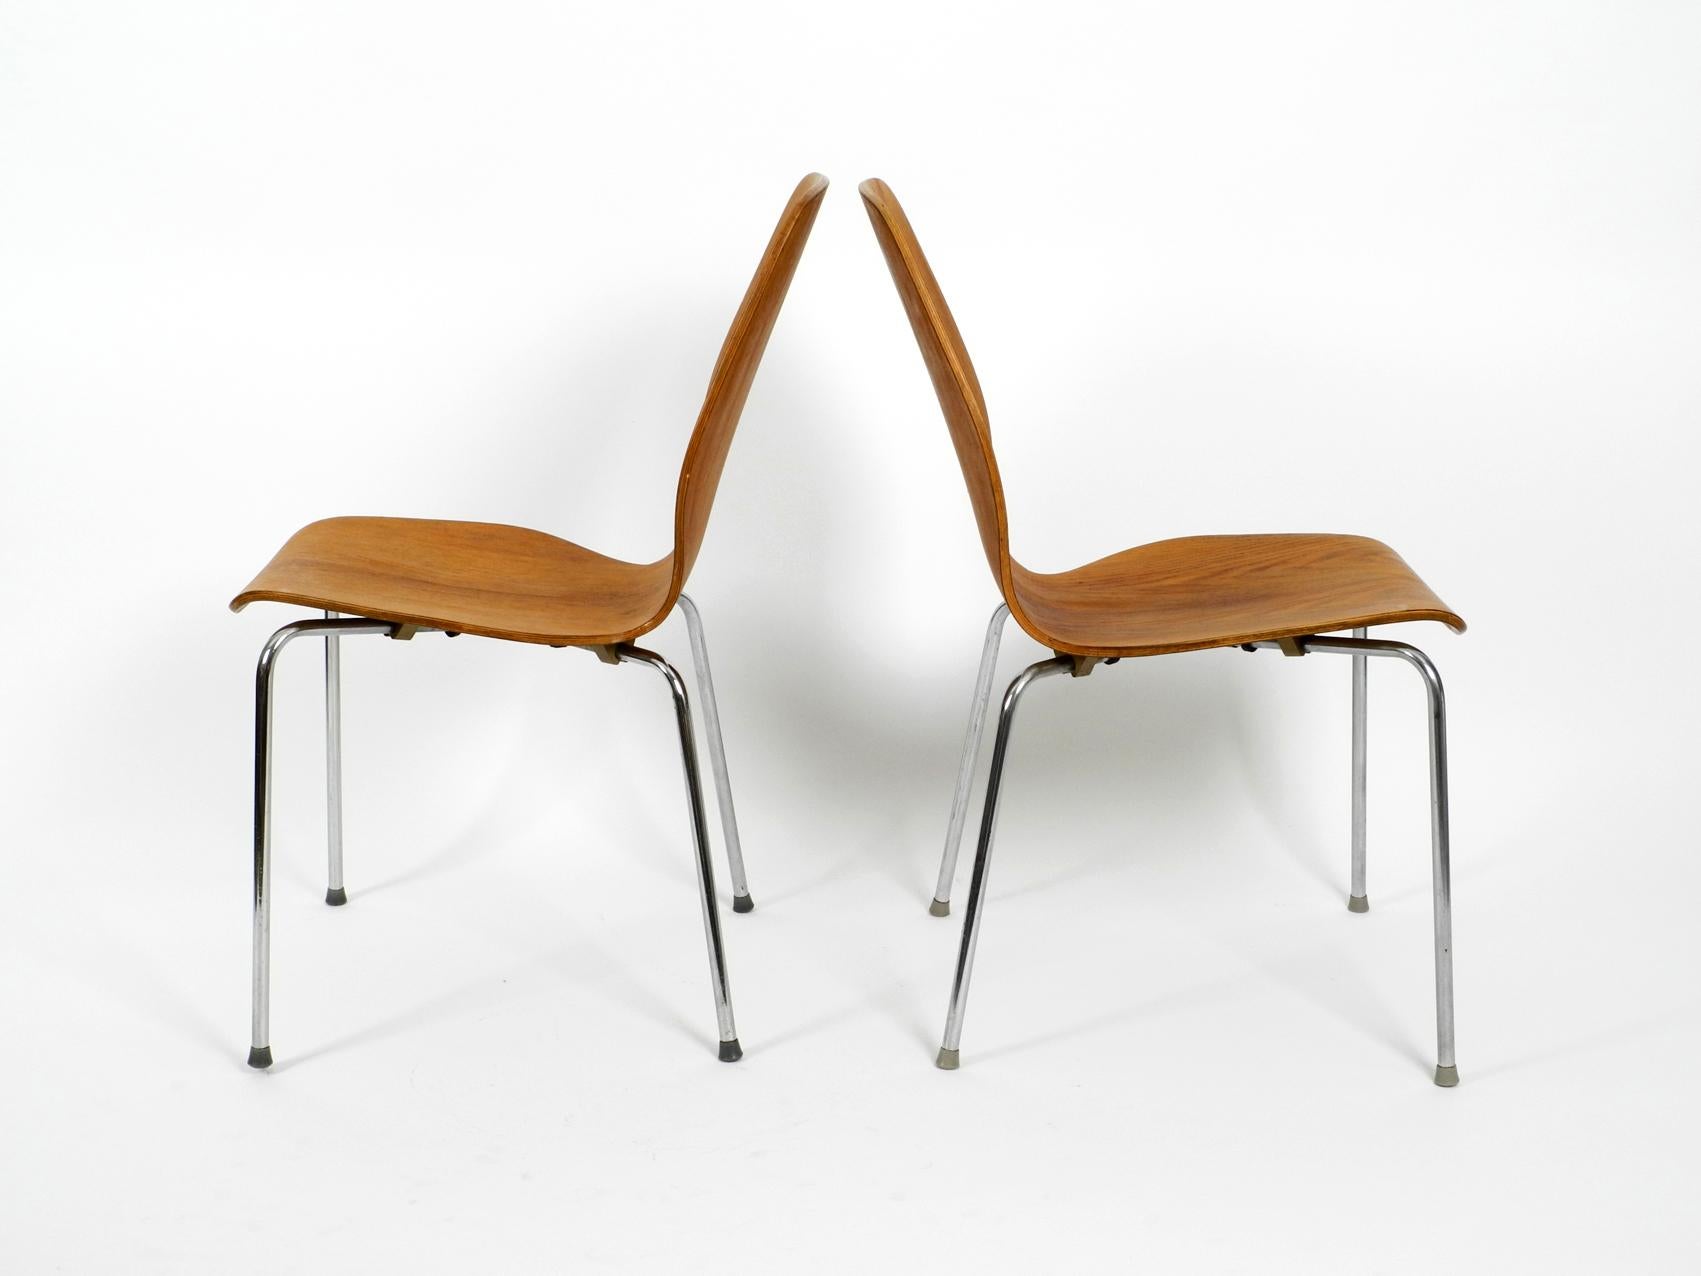 Mid-20th Century Set of 6 teak plywood chairs by Herbert Hirche for Jofa Stalmobler Denmark